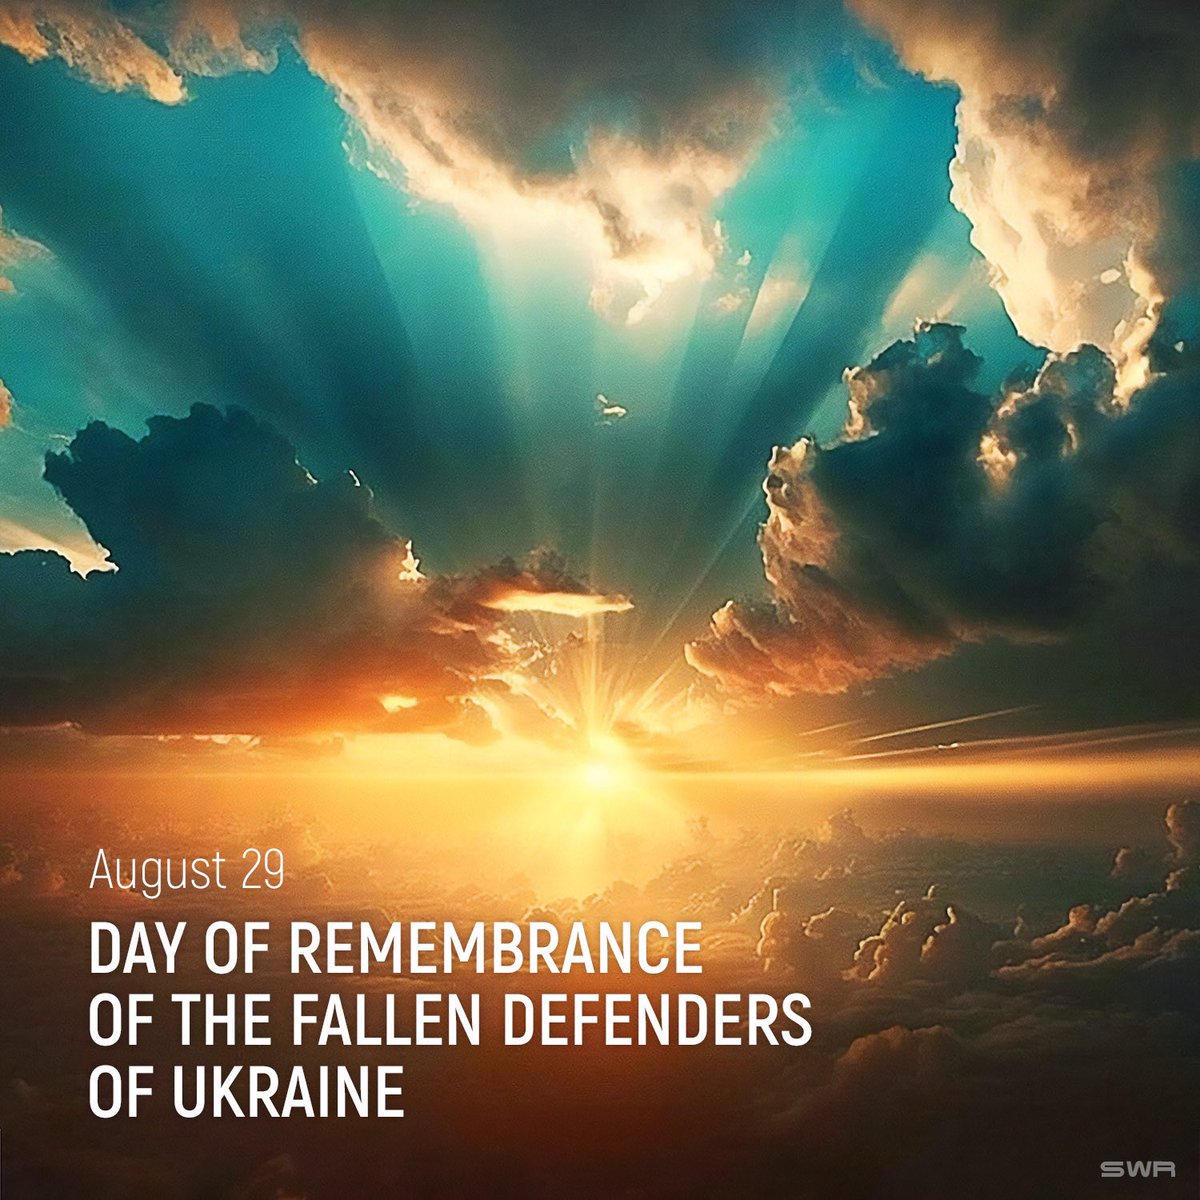 Today in Ukraine, it's the Day of Remembrance of the Fallen Defenders of Ukraine. On this day, we remember the soldiers who gave their lives in the war with russia. The war for freedom. The war for the survival of our people and our state. They gave us time to build a new army…